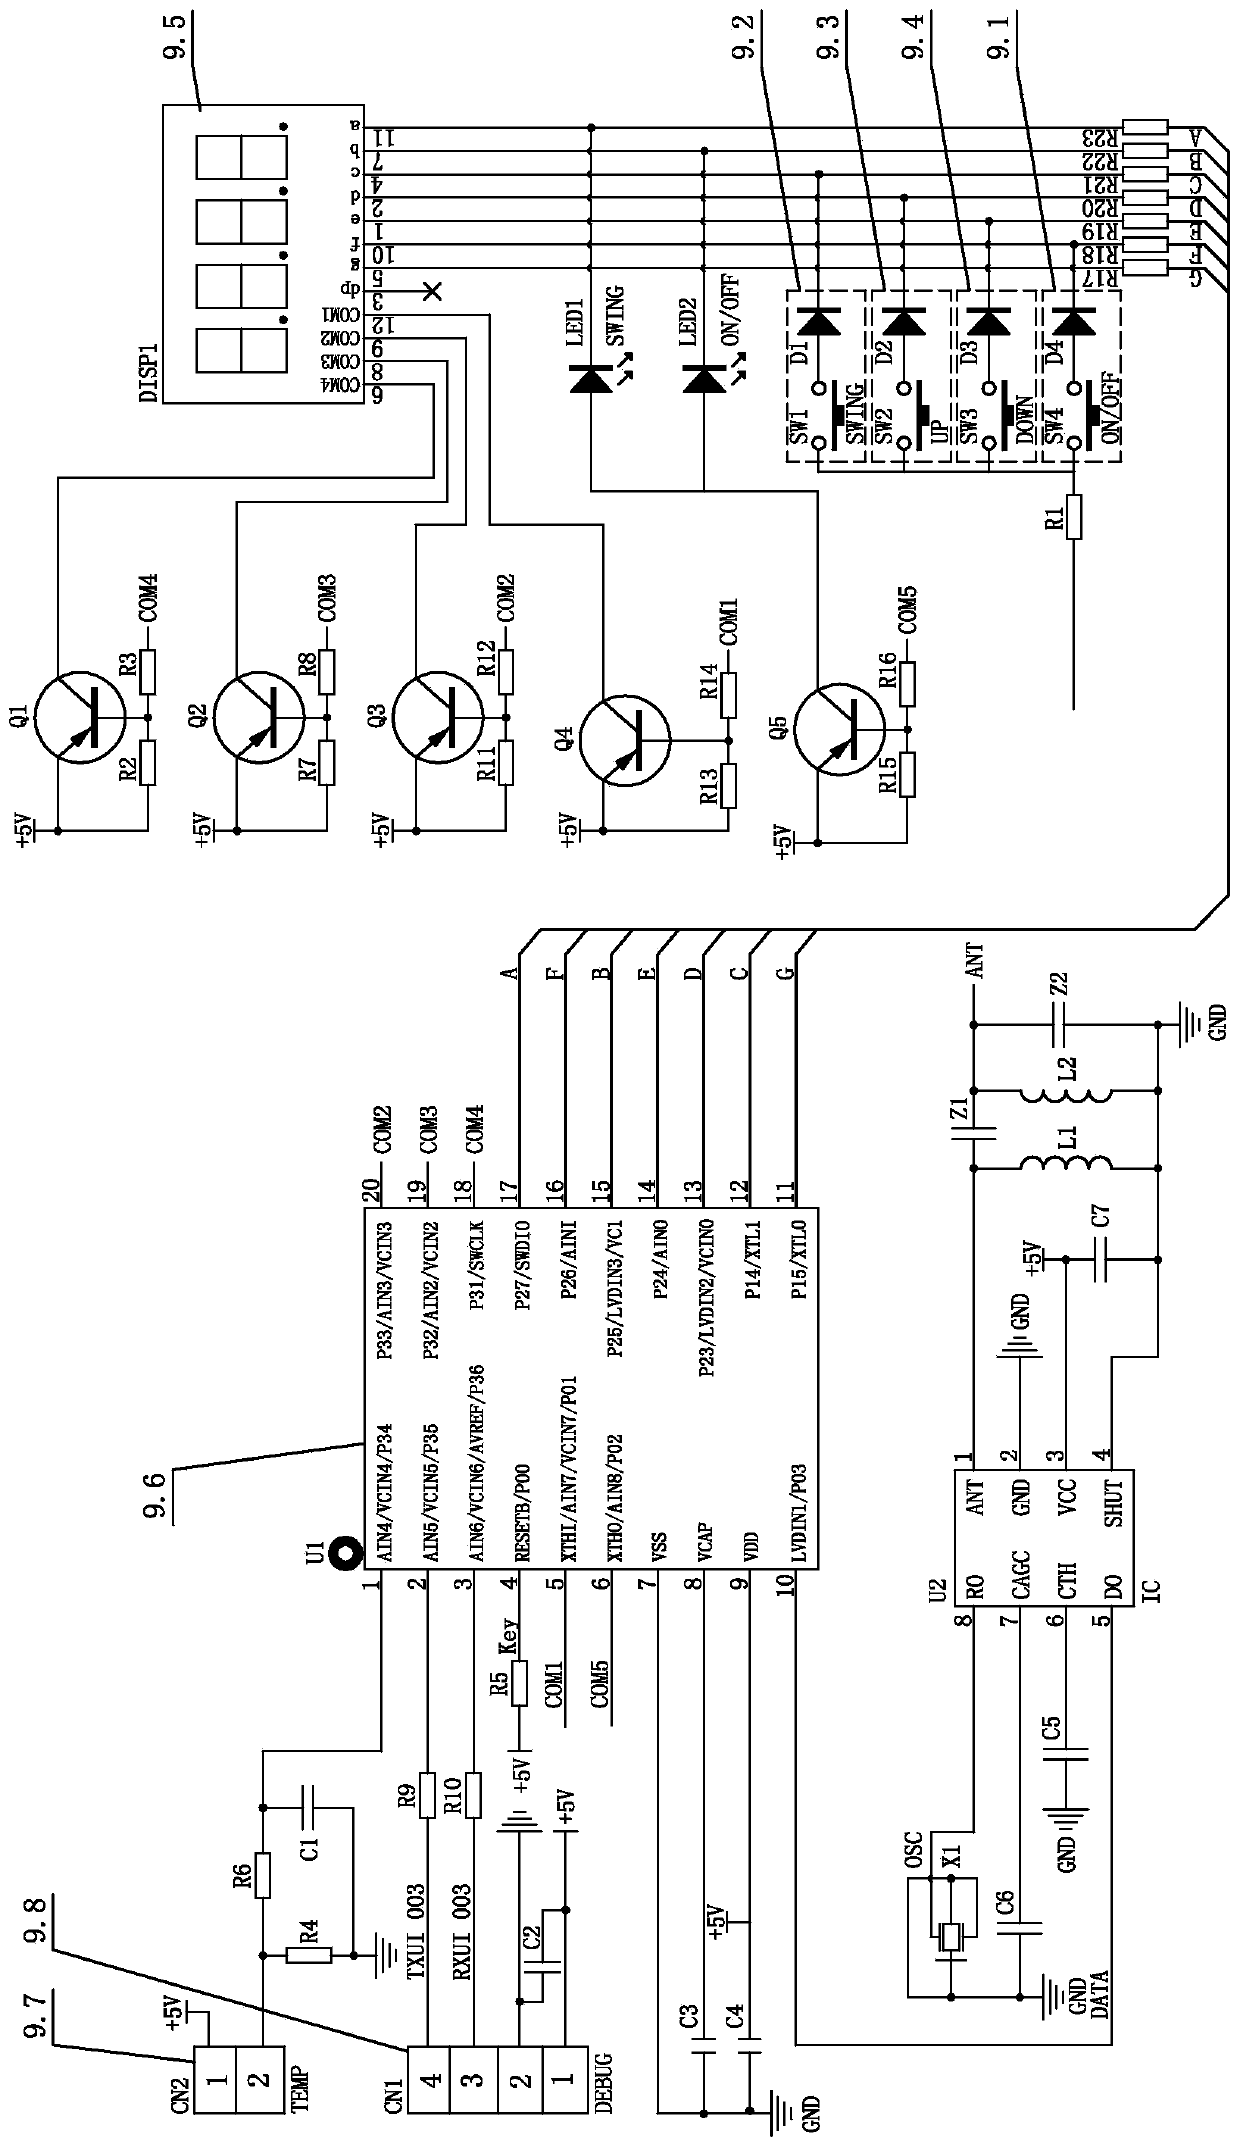 Fan temperature sensing and speed regulating method and industrial or commercial electric fan